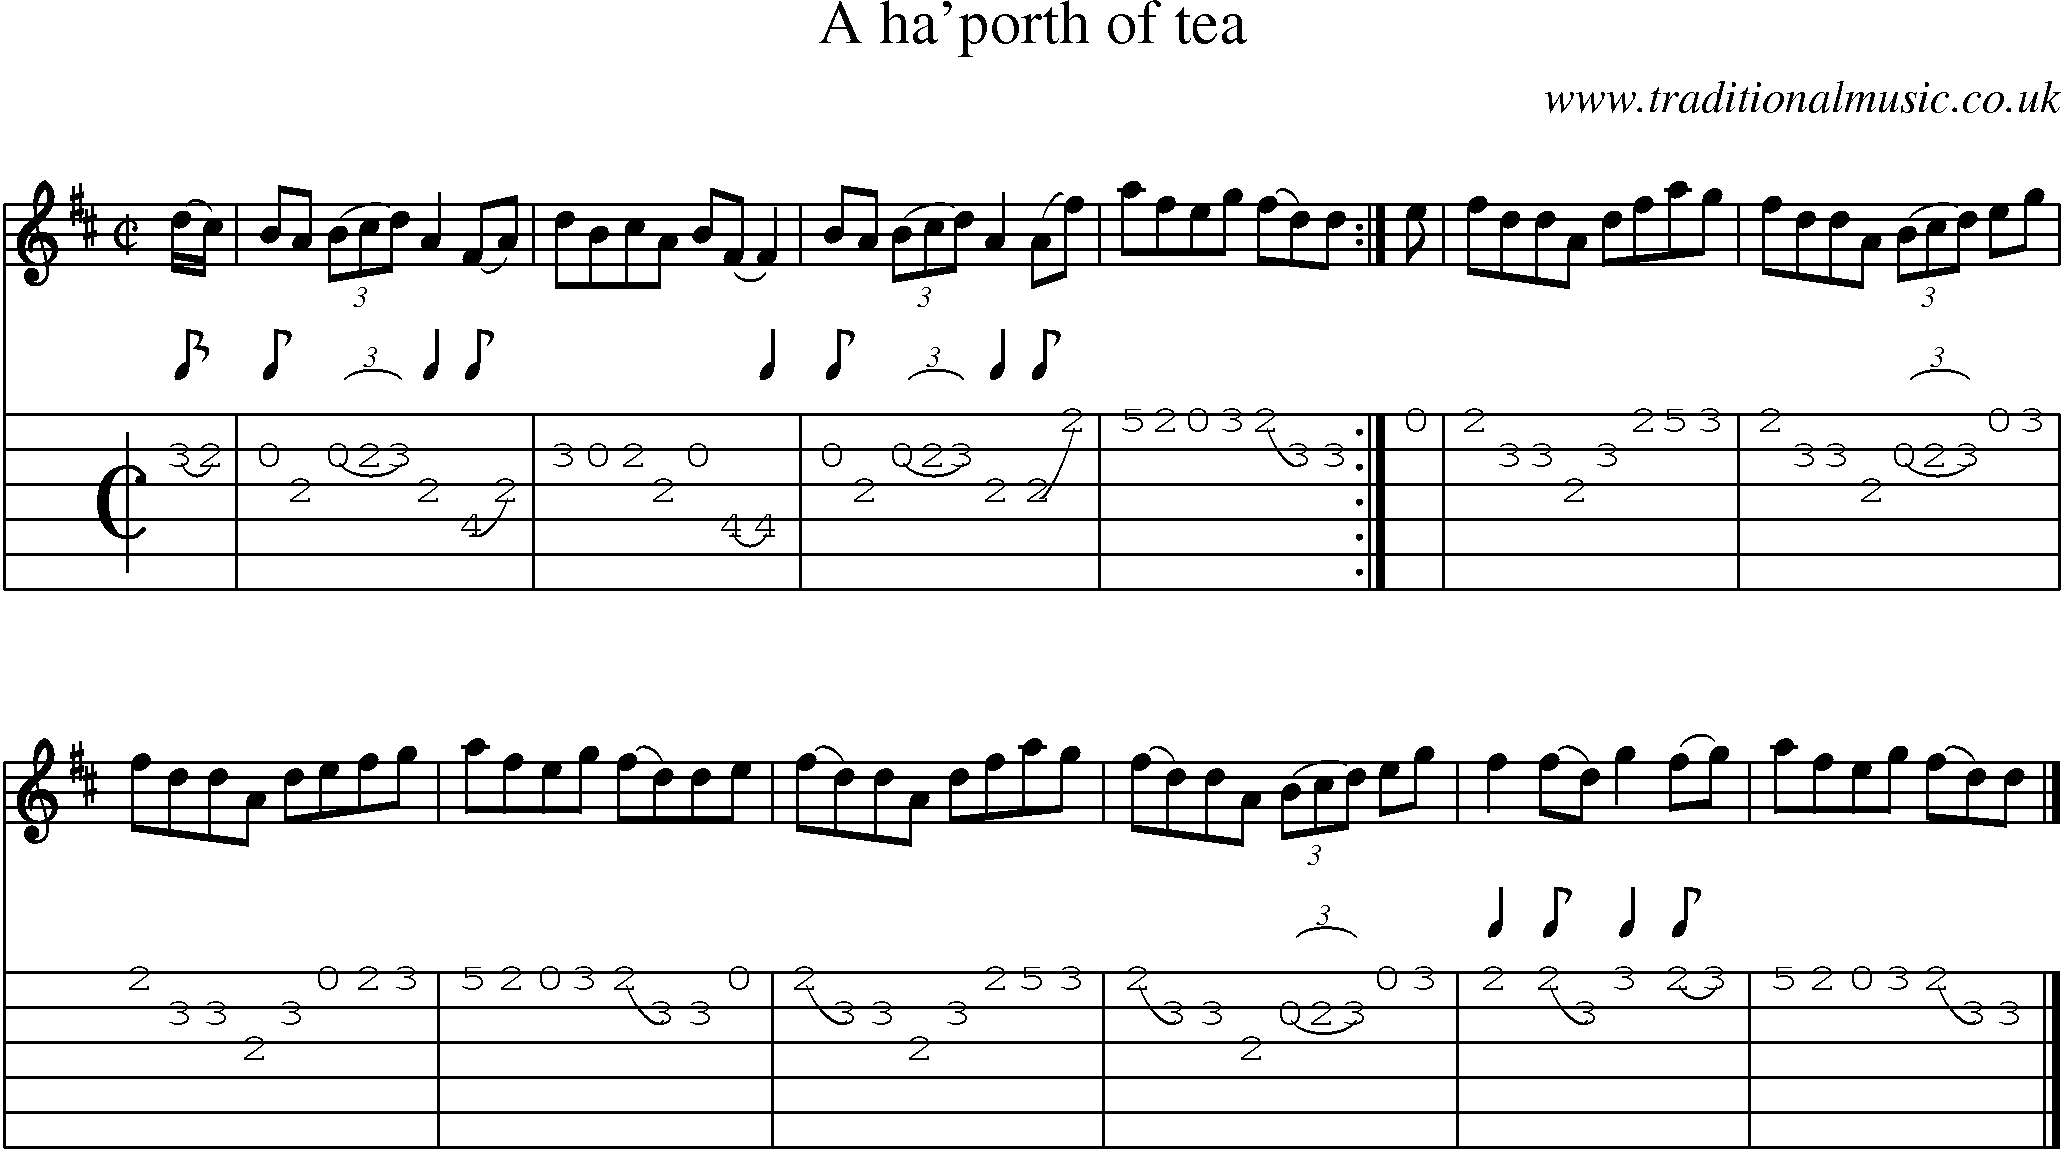 Music Score and Guitar Tabs for Haporth Of Tea